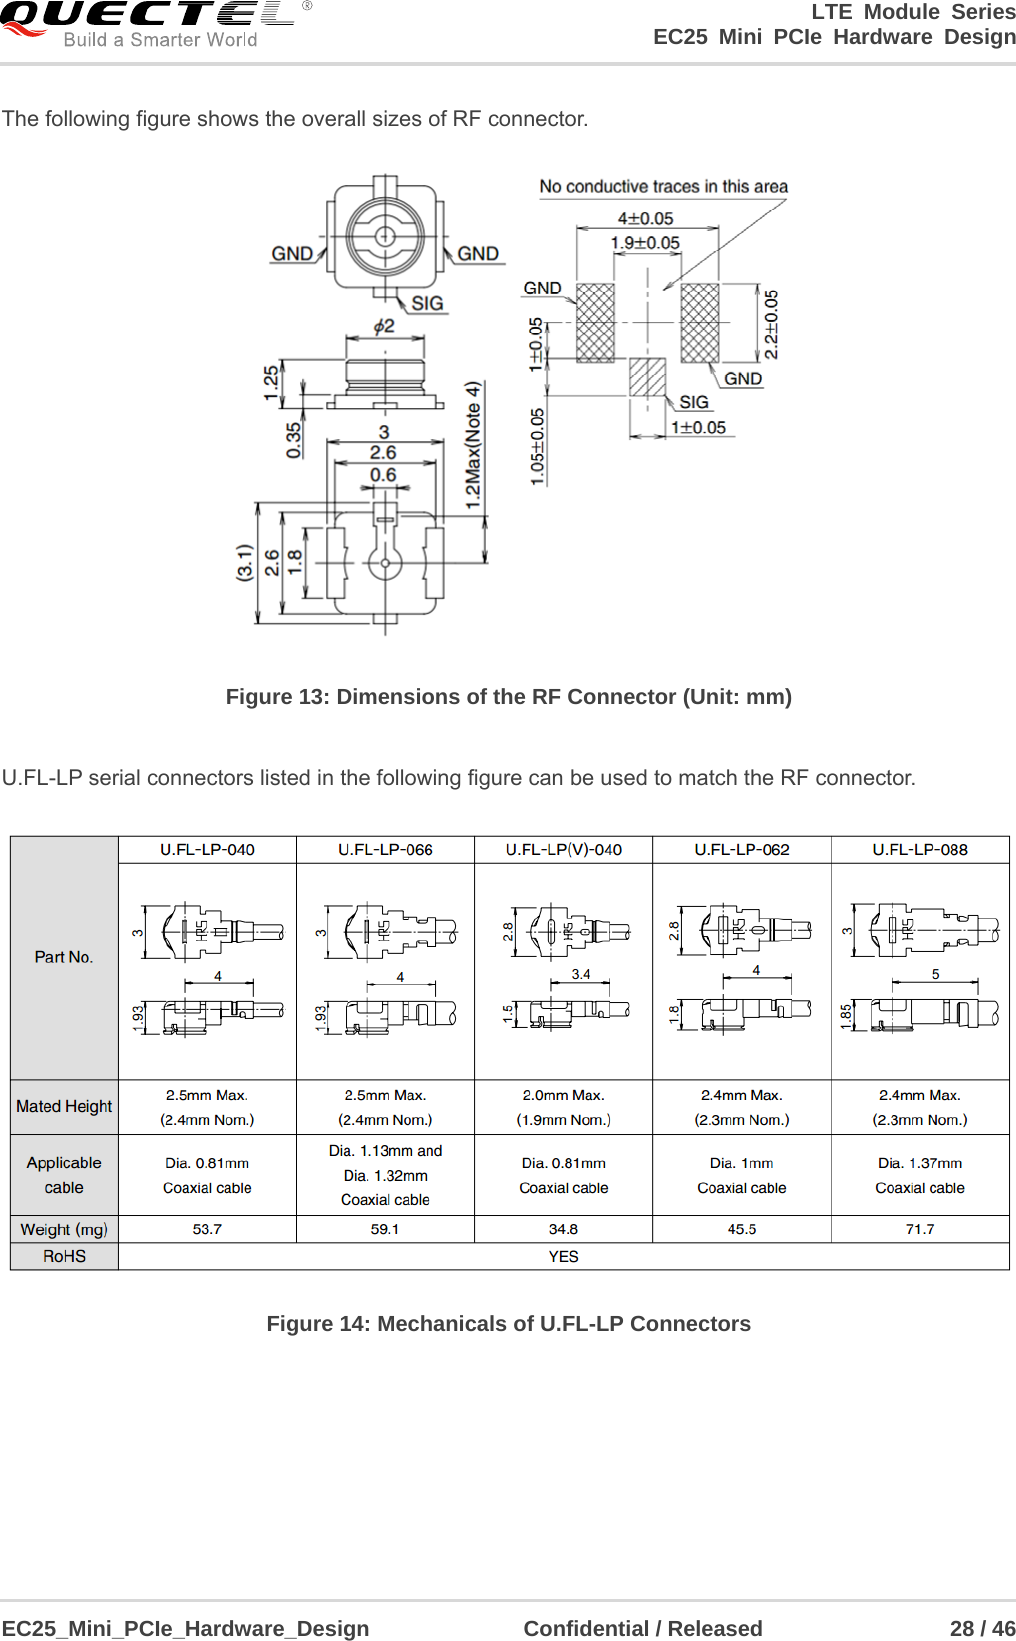                                        LTE Module Series                                                  EC25 Mini PCIe Hardware Design  EC25_Mini_PCIe_Hardware_Design              Confidential / Released                 28 / 46    The following figure shows the overall sizes of RF connector.  Figure 13: Dimensions of the RF Connector (Unit: mm)    U.FL-LP serial connectors listed in the following figure can be used to match the RF connector.    Figure 14: Mechanicals of U.FL-LP Connectors 